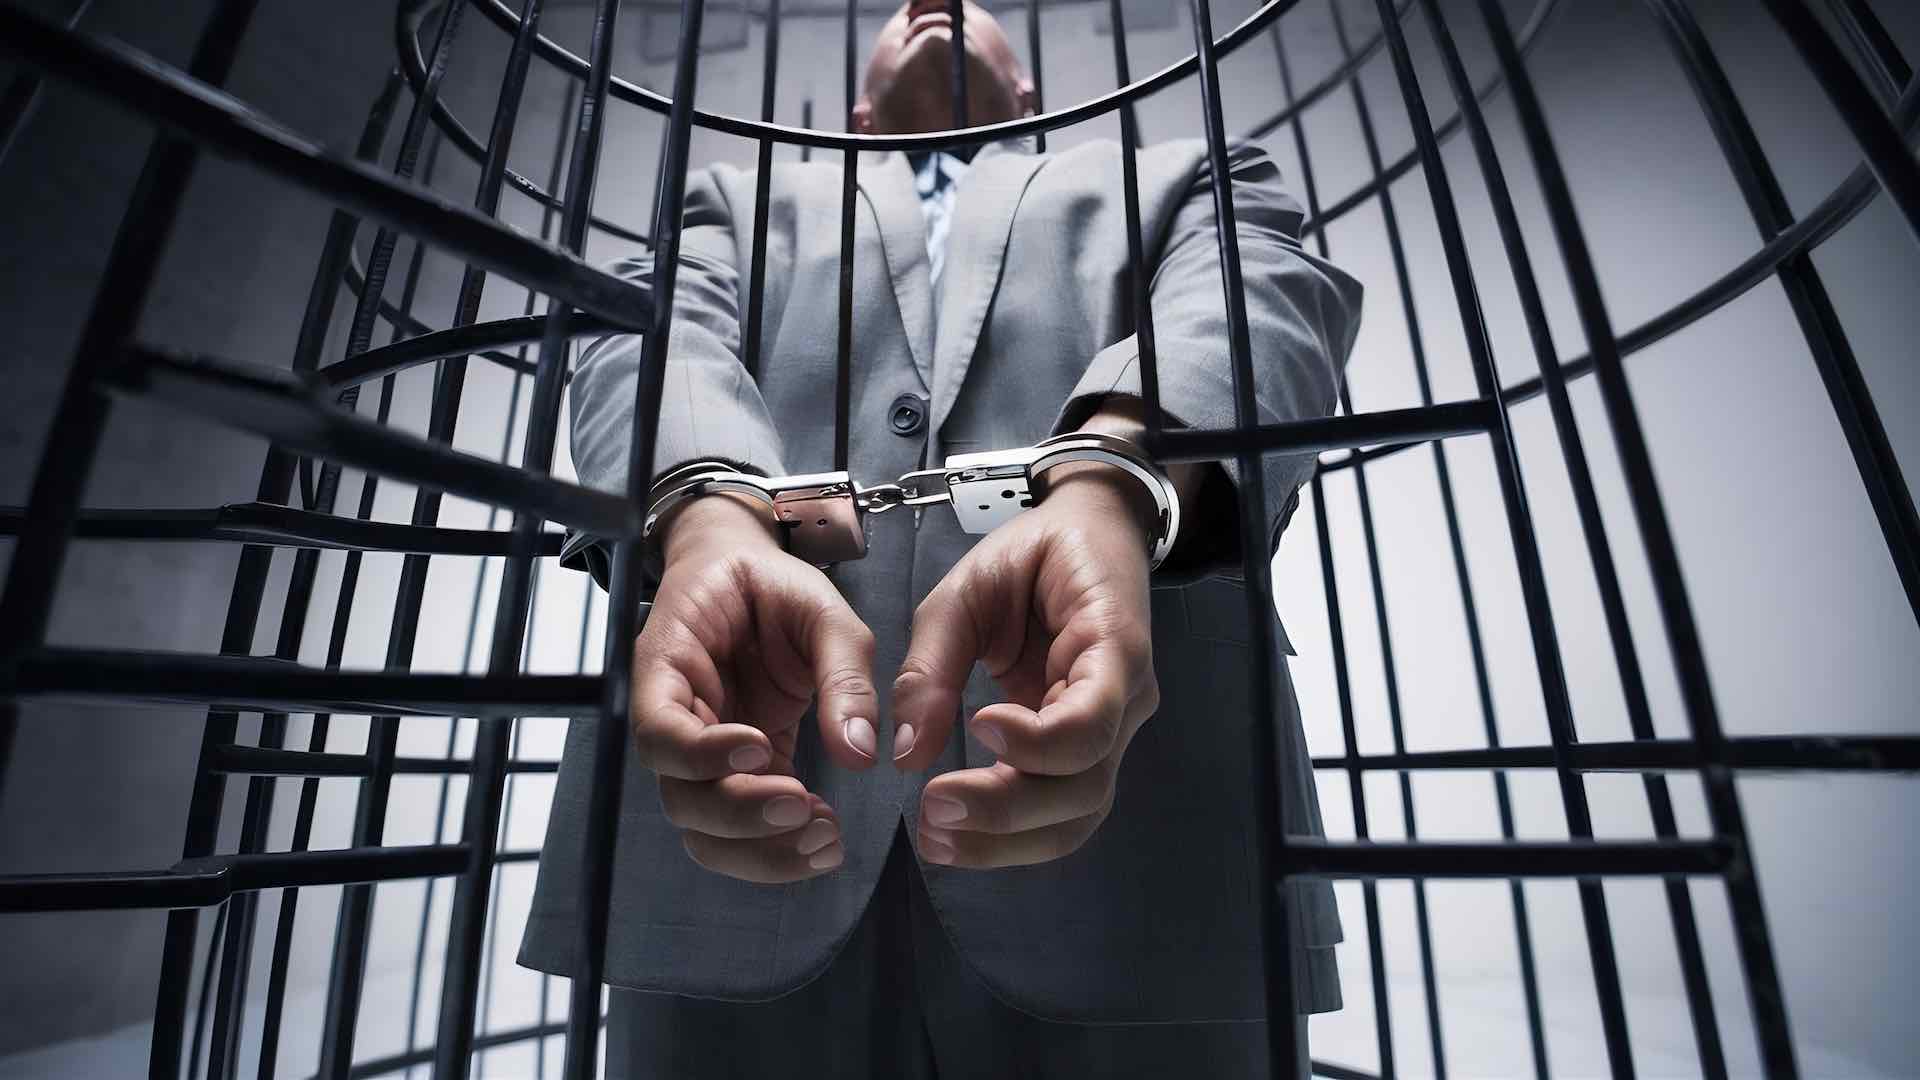 Binance founder gets four months in prison for money laundering